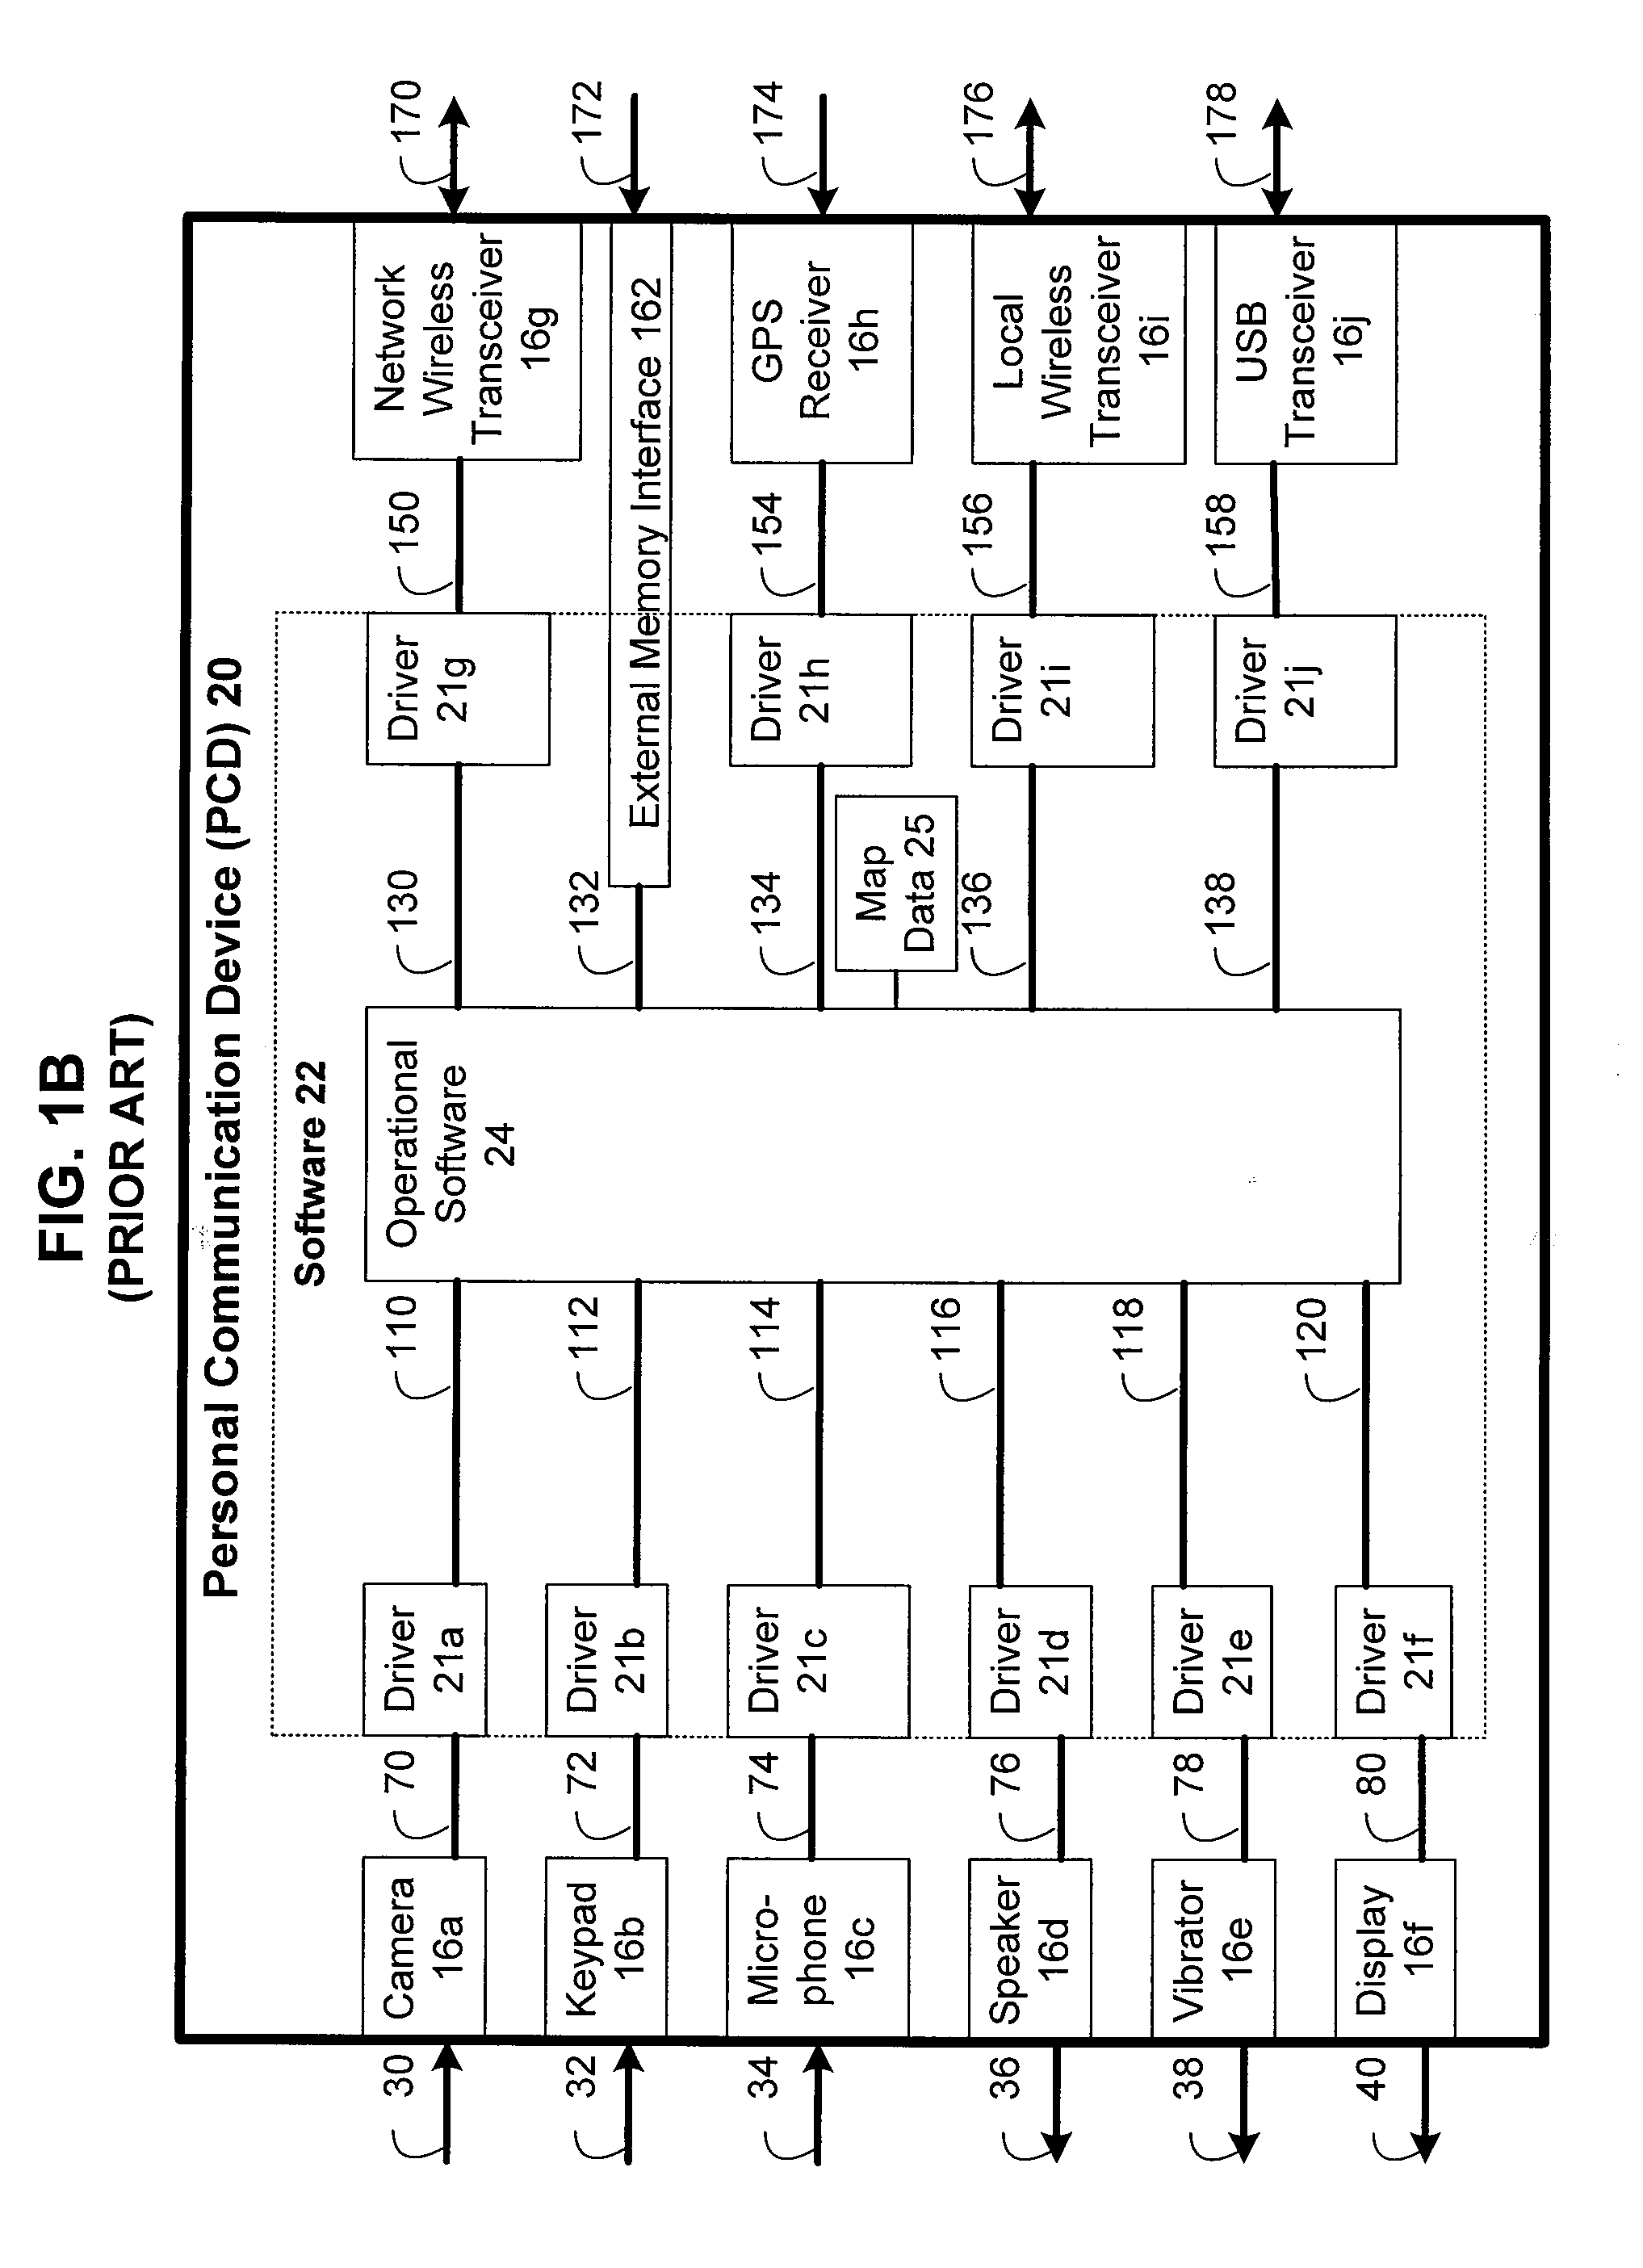 Control Systems and Methods for a Personal Communication Device (PCD)